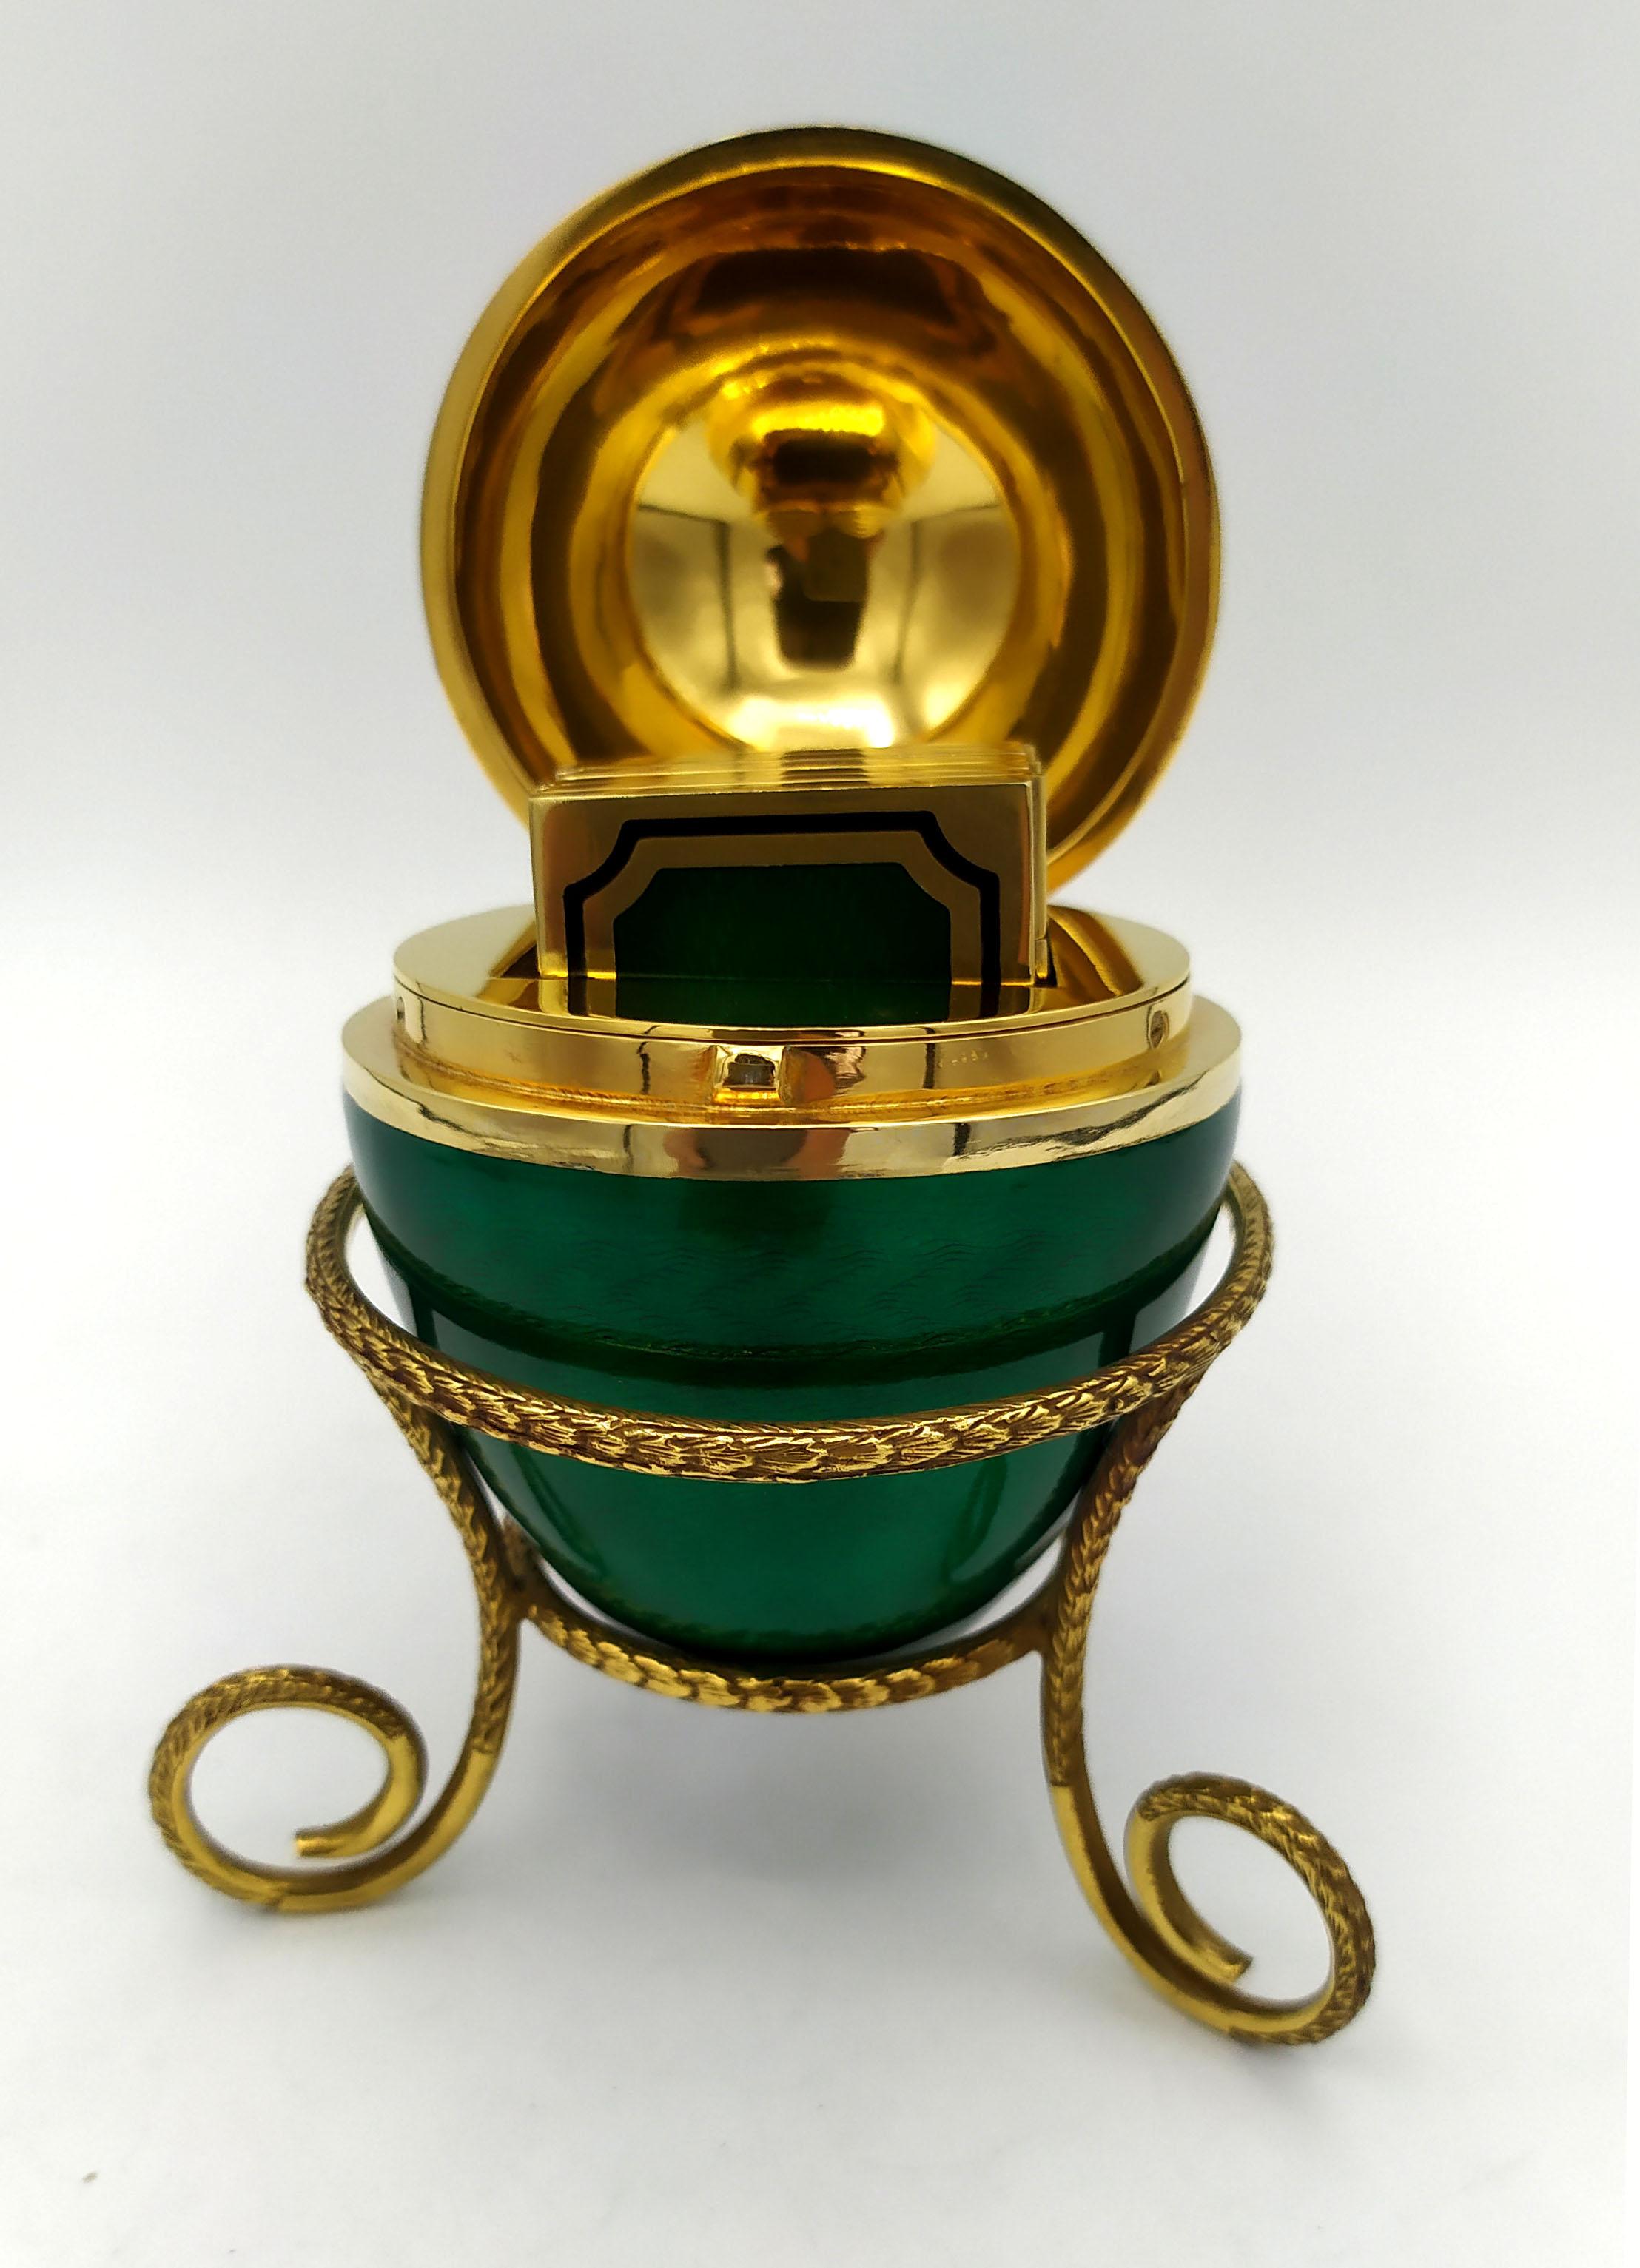 Egg on tripod with folding photo frame for 6 photos, inside, in 925/1000 sterling Silver gold plated, with translucent fired enamels on guillochè. Russian Empire style inspired by Carl Fabergè eggs at the end of the 19th century, early 1900s. Egg